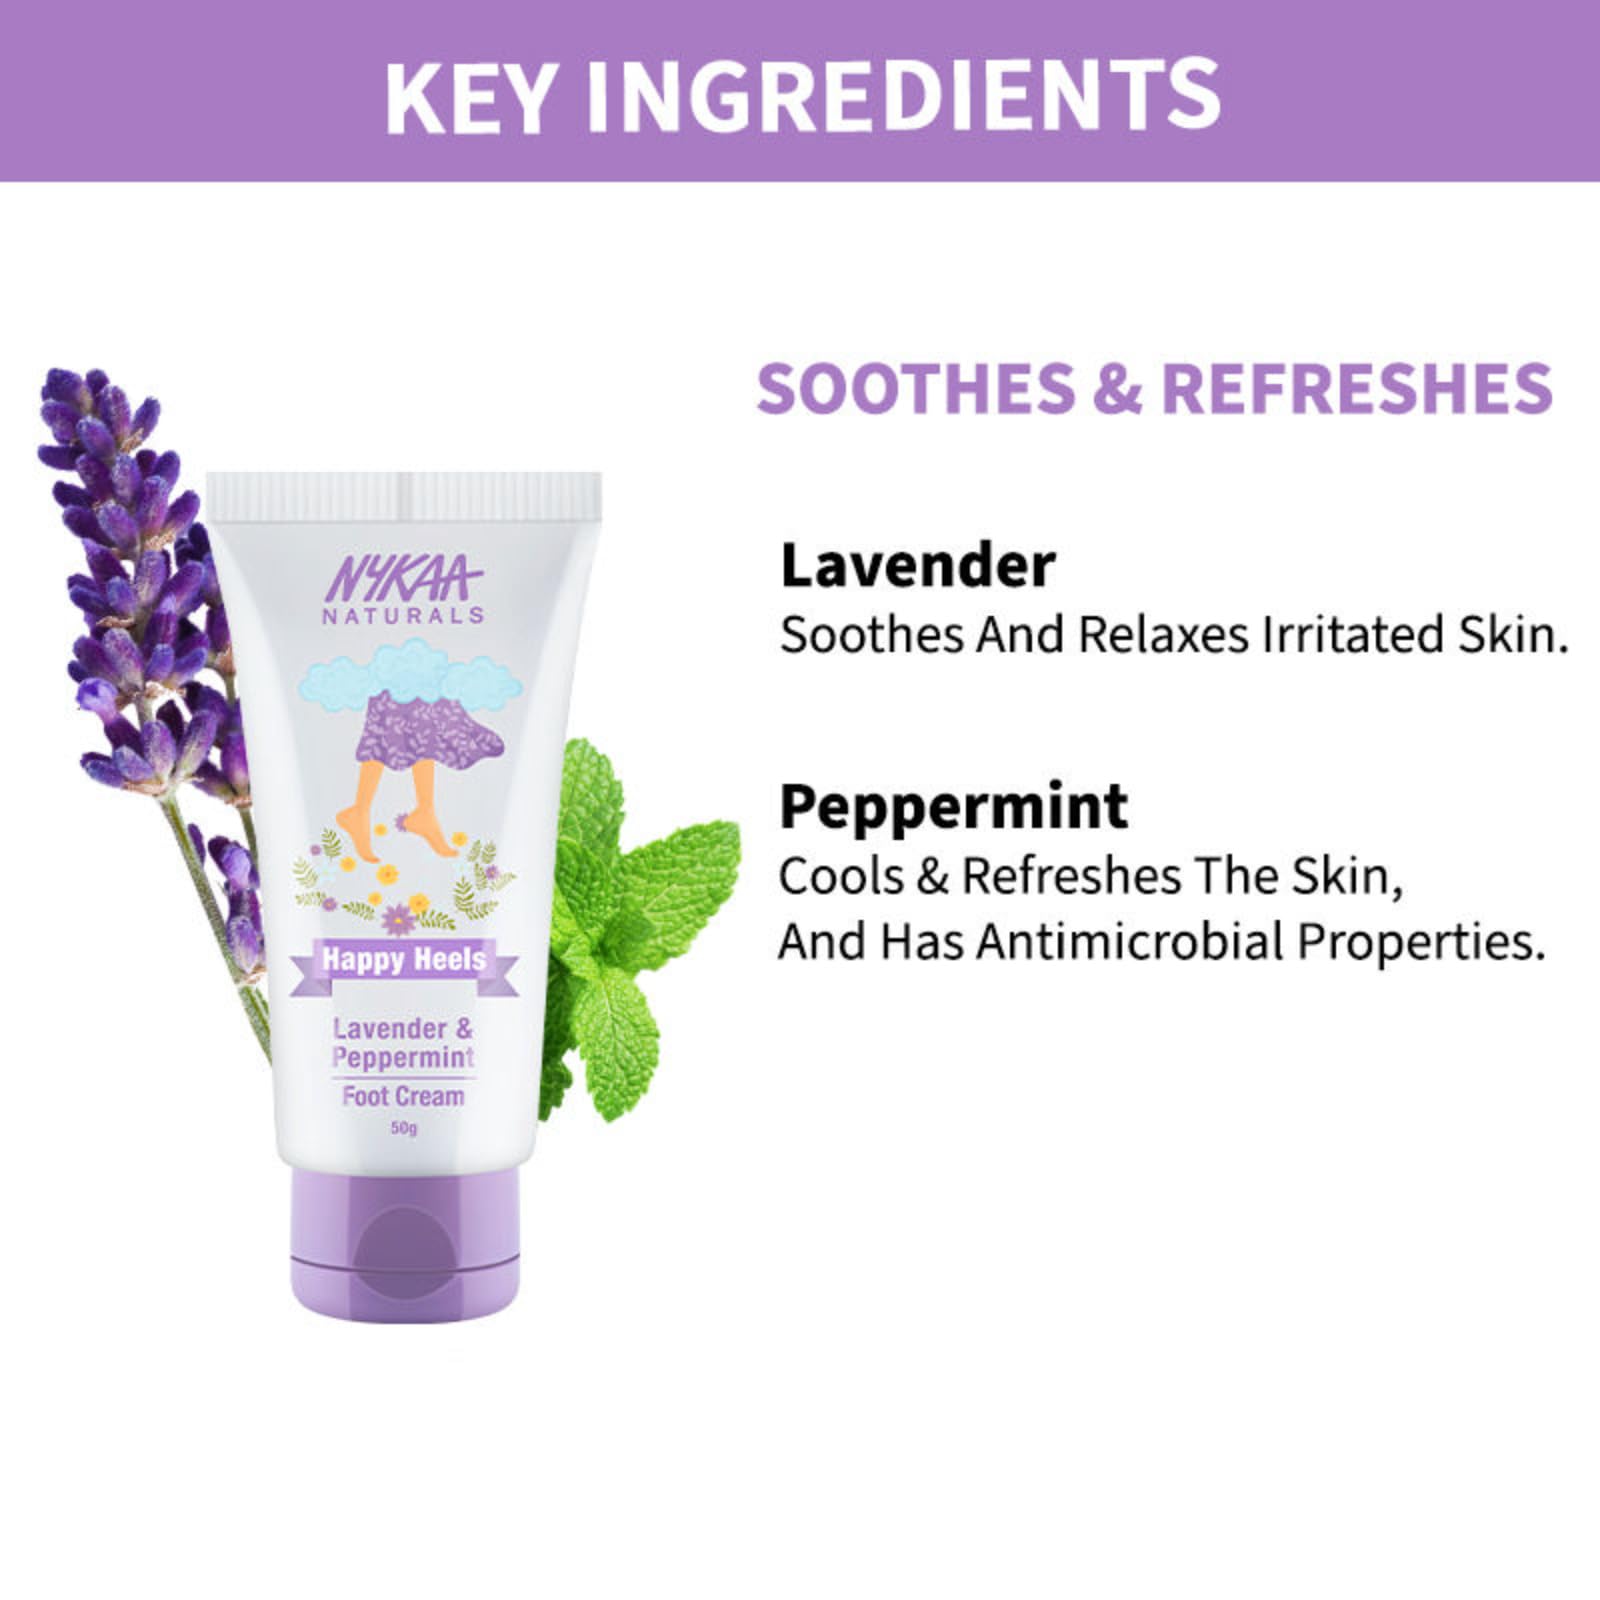 Nykaa Naturals Happy Heels Footcream - Non-Greasy Lotion - Exfoliates and Softens Rough Feet - Delicate Fragrance - Lavender and Peppermint - 1.7 oz